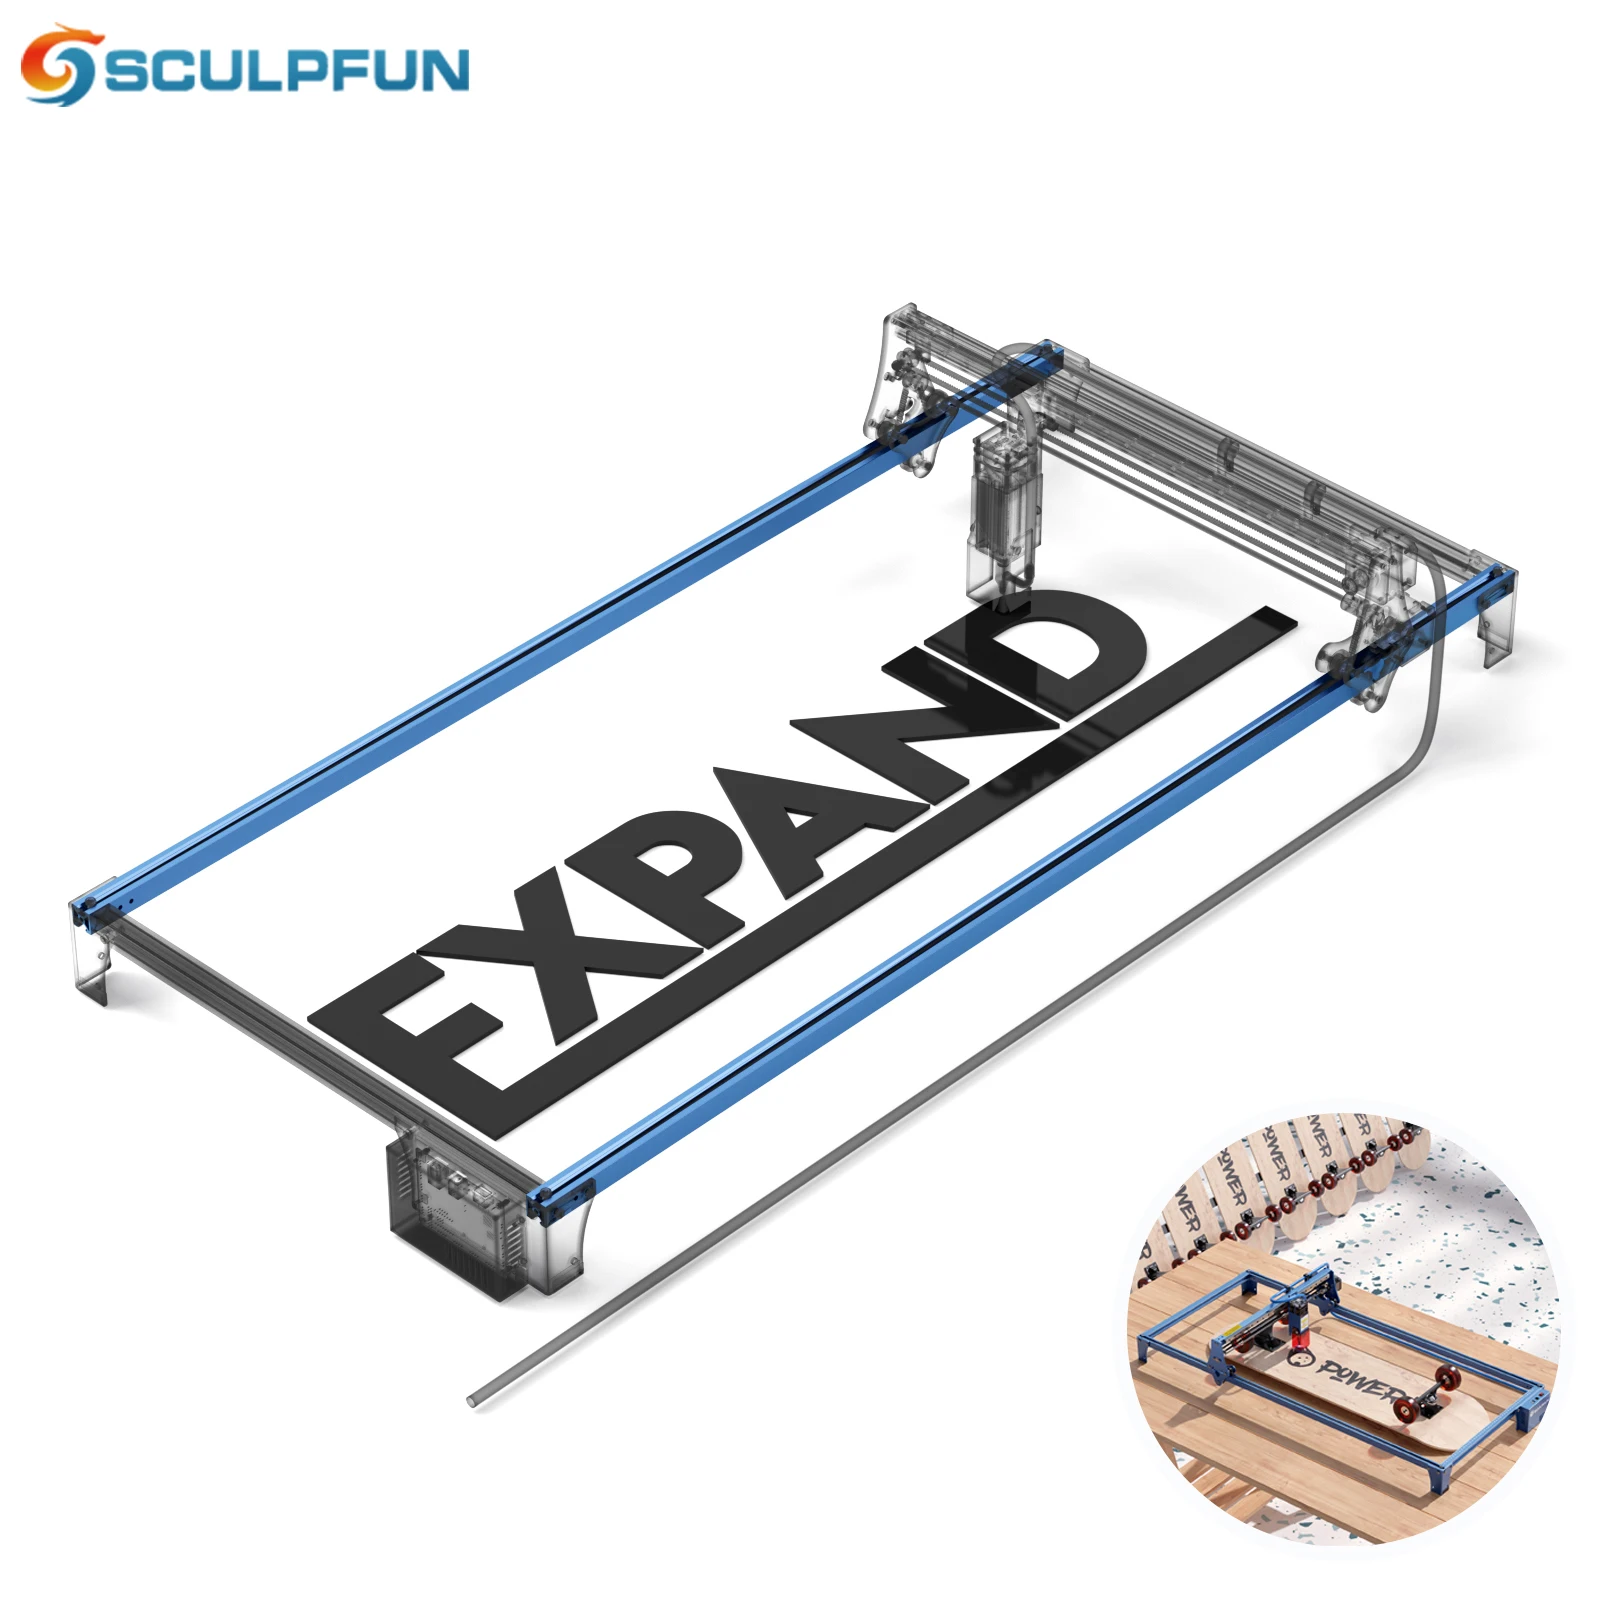 Sculpfun S10 Engraving Area Expansion Kit for S9/S6pro/S6 Engraving Machine Y-axis Extension Kit 940x410mm Engraving Area